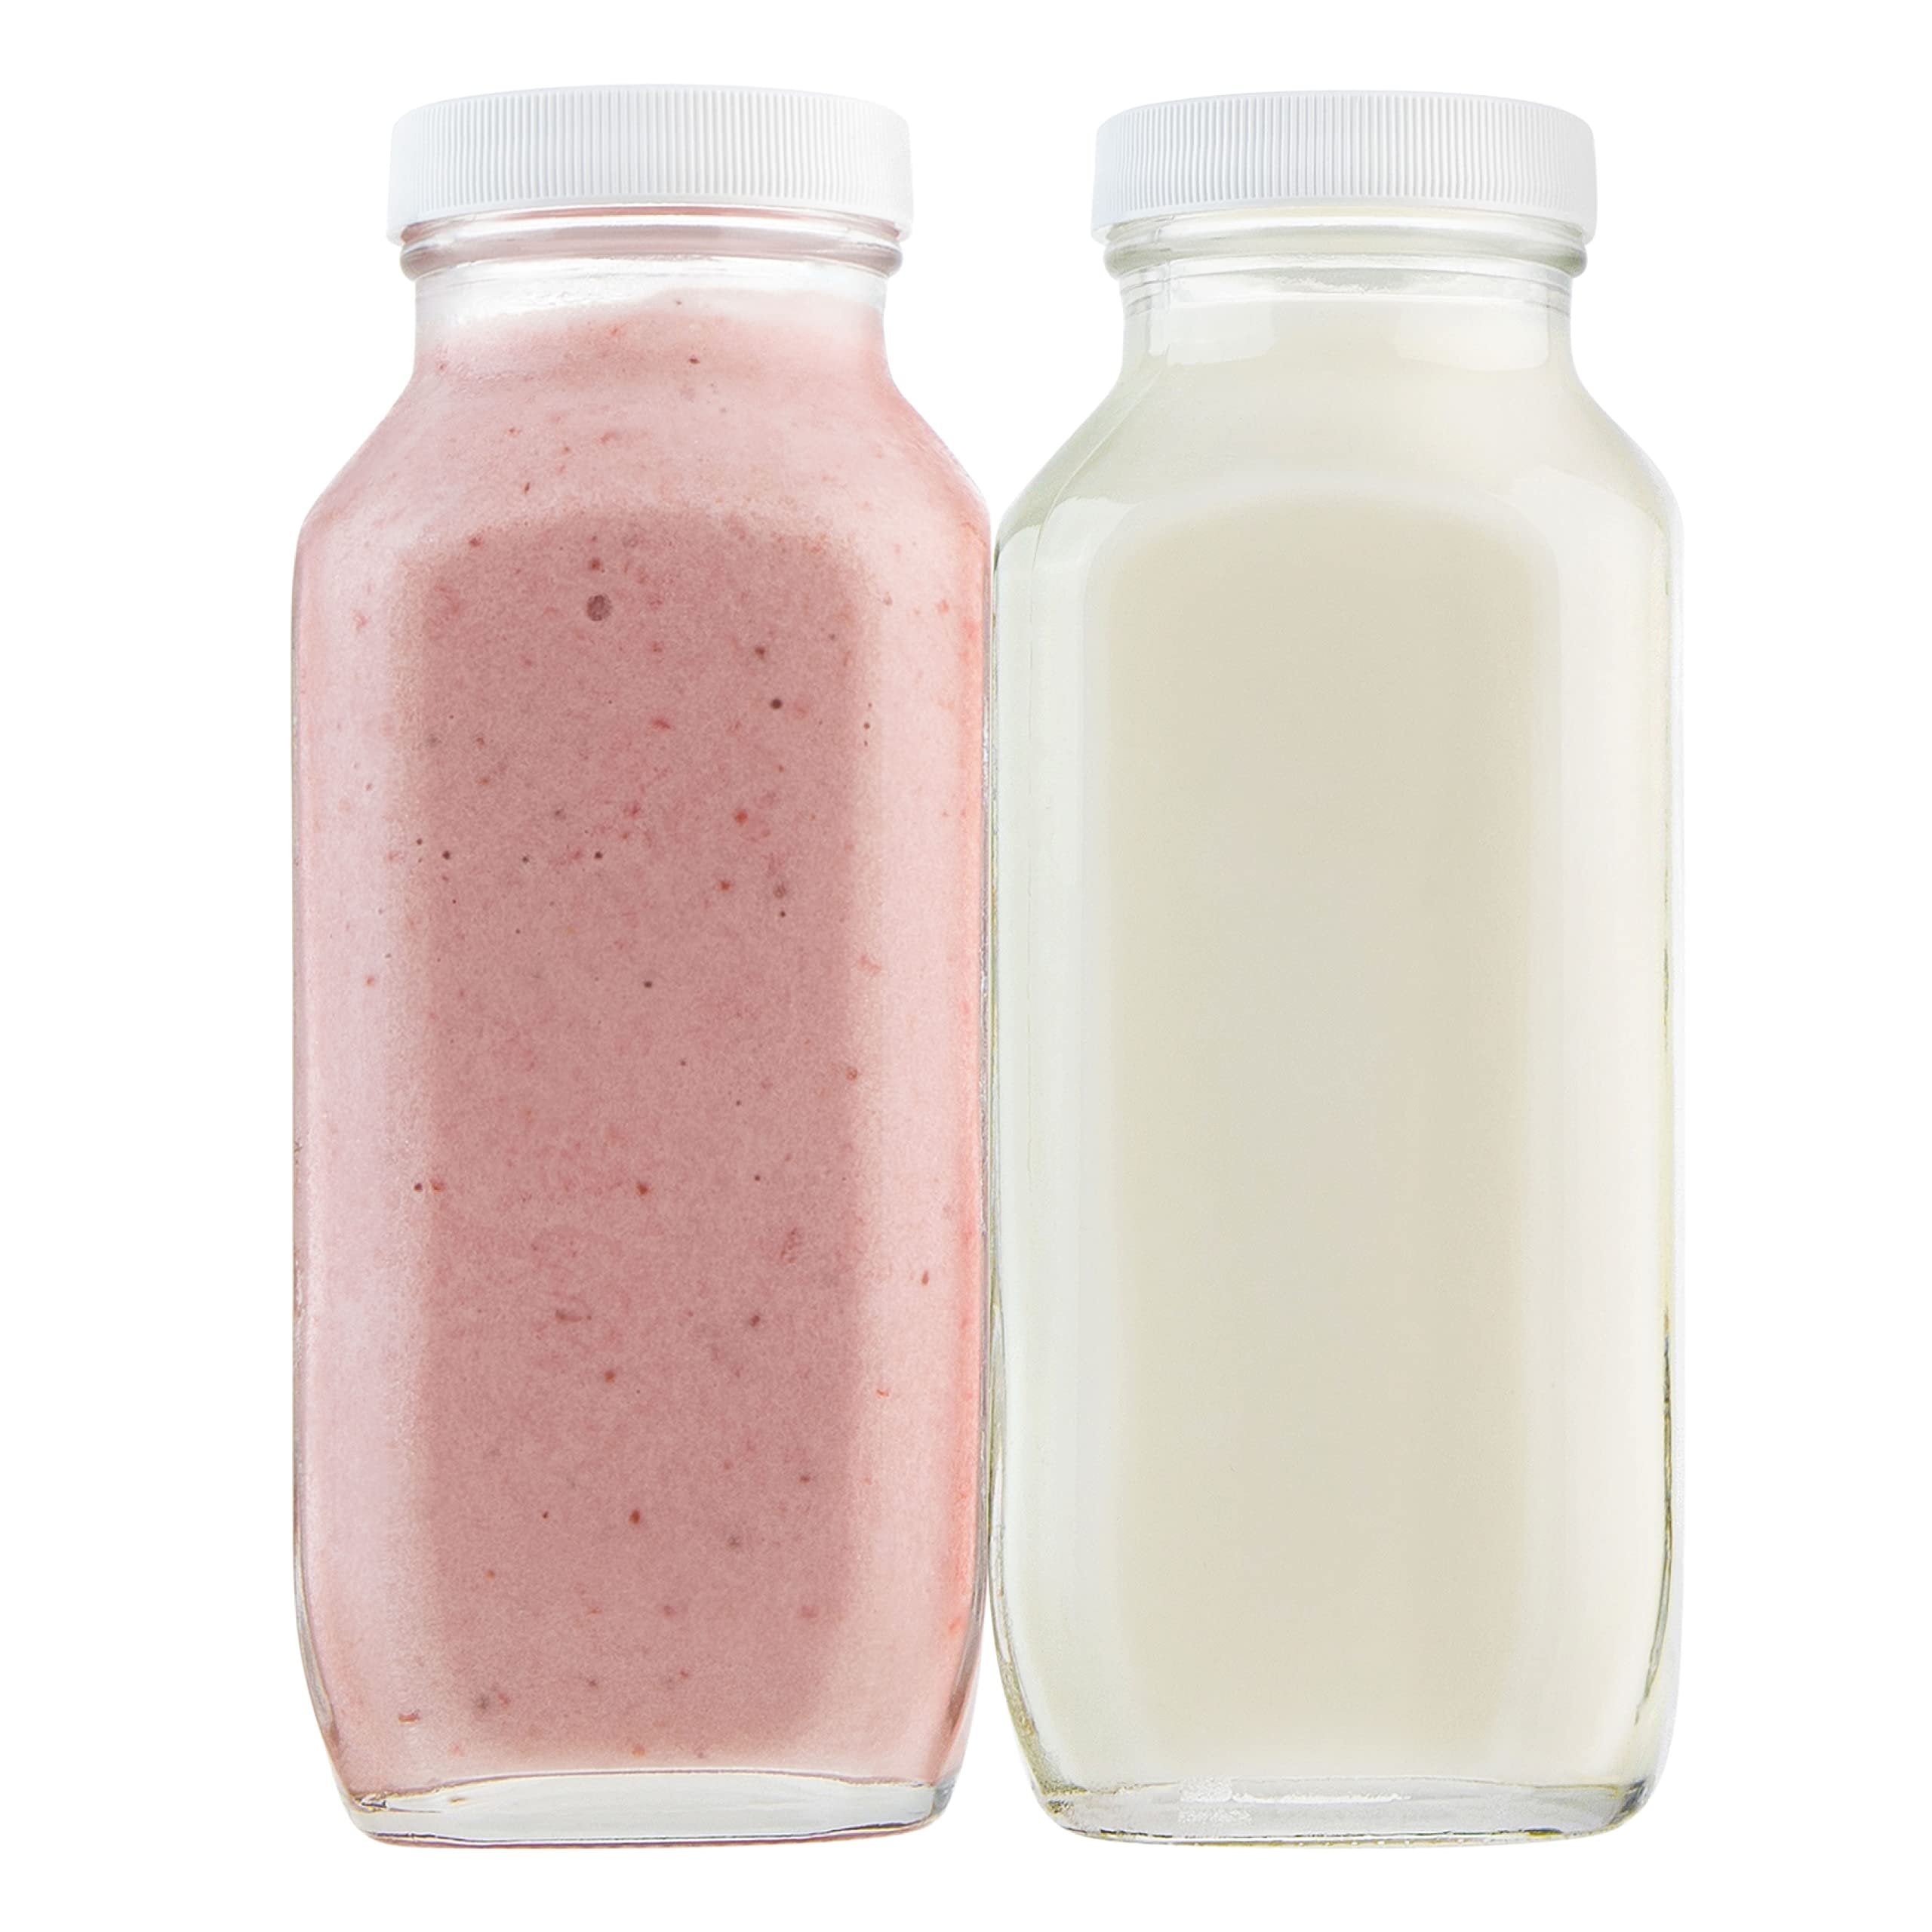 kitchentoolz 16oz Square Glass Milk Bottle with Plastic Airtight Lids - Vintage Reusable Dairy Drinking Jars Containers for Milk, Yogurt, Smoothies, Kefir, Kombucha, and Water- Pack of 2